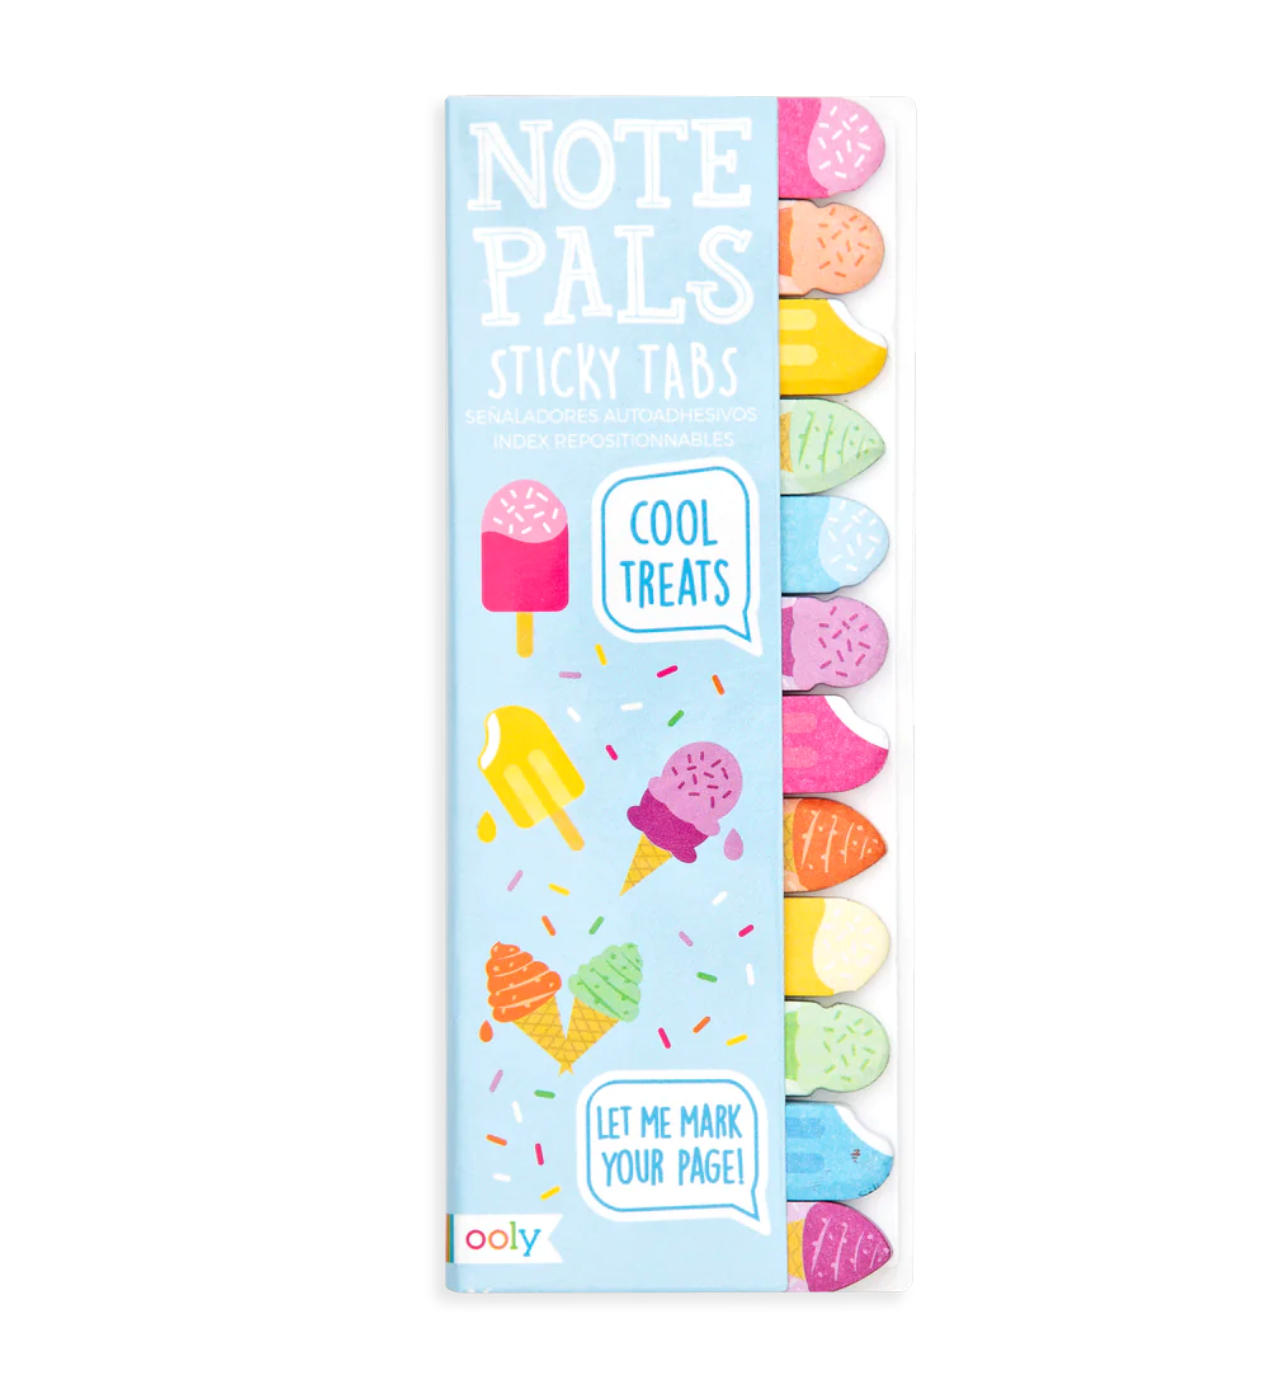 Note pals sticky tabs | Popsicle